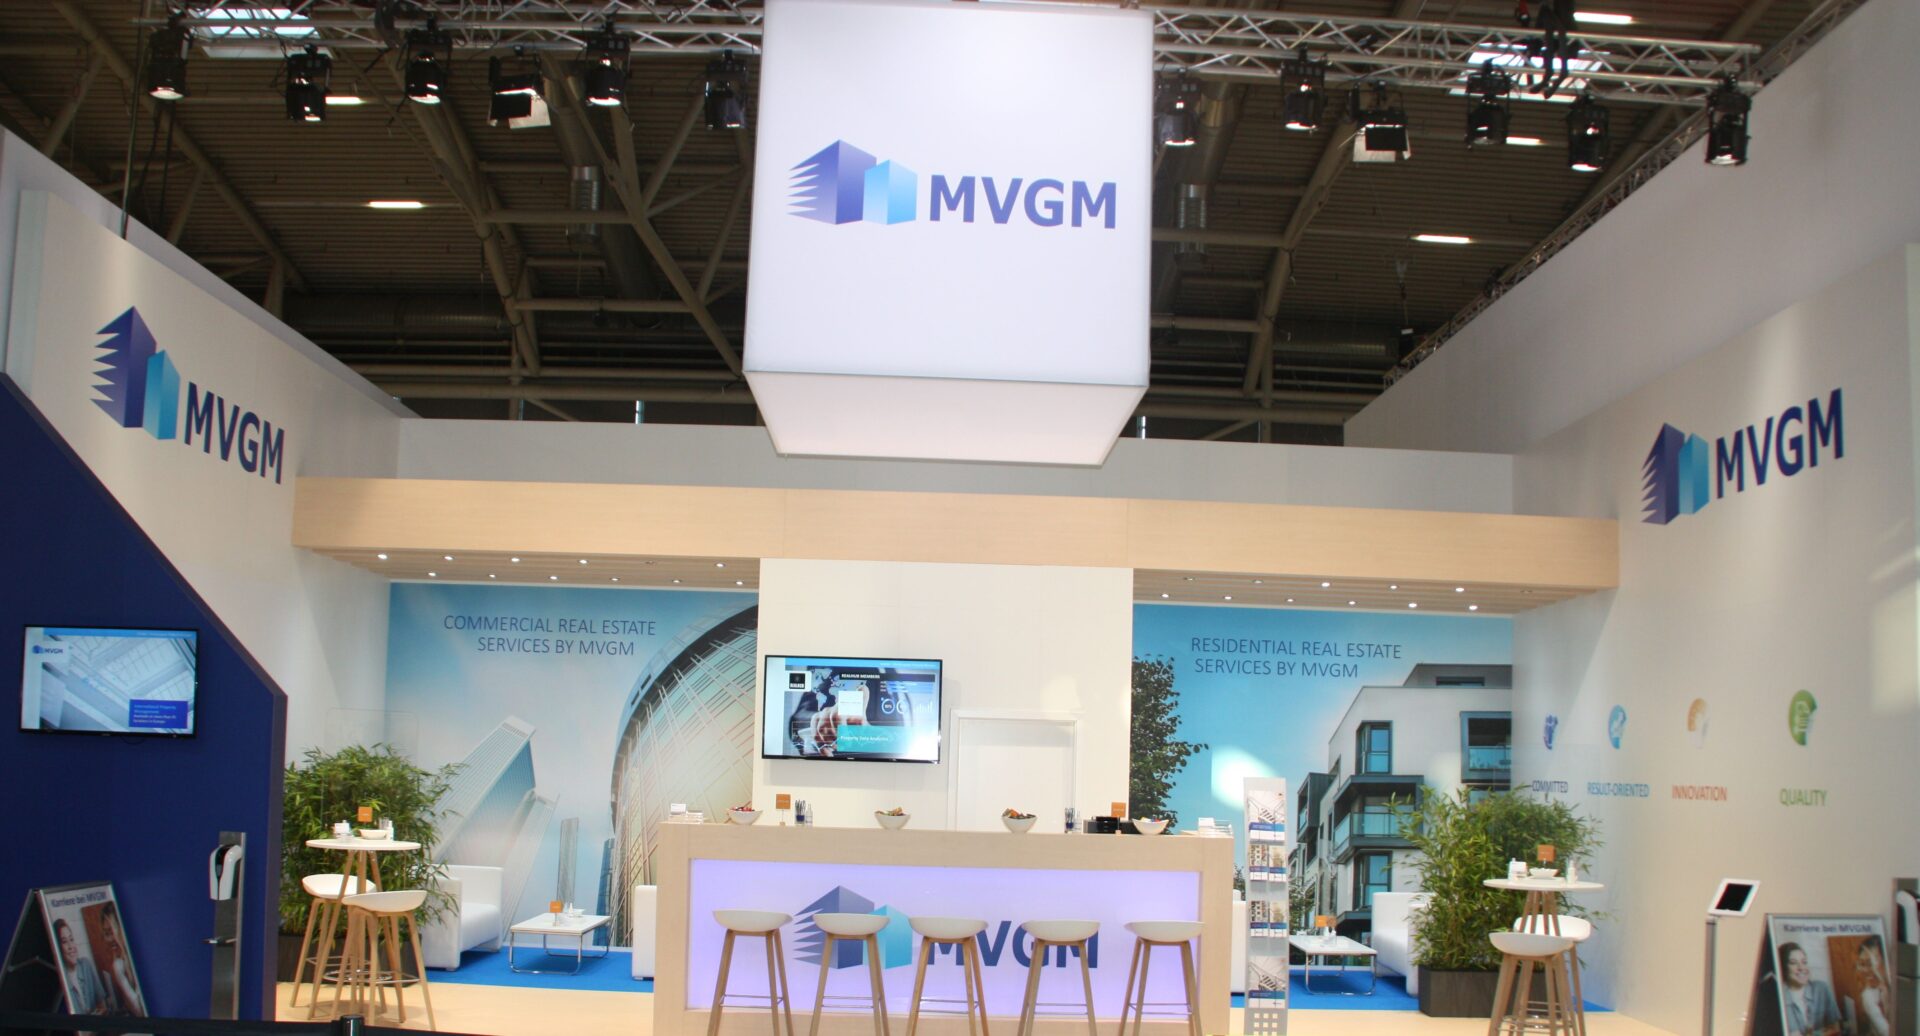 EXPO REAL exhibitor MVGM 2021